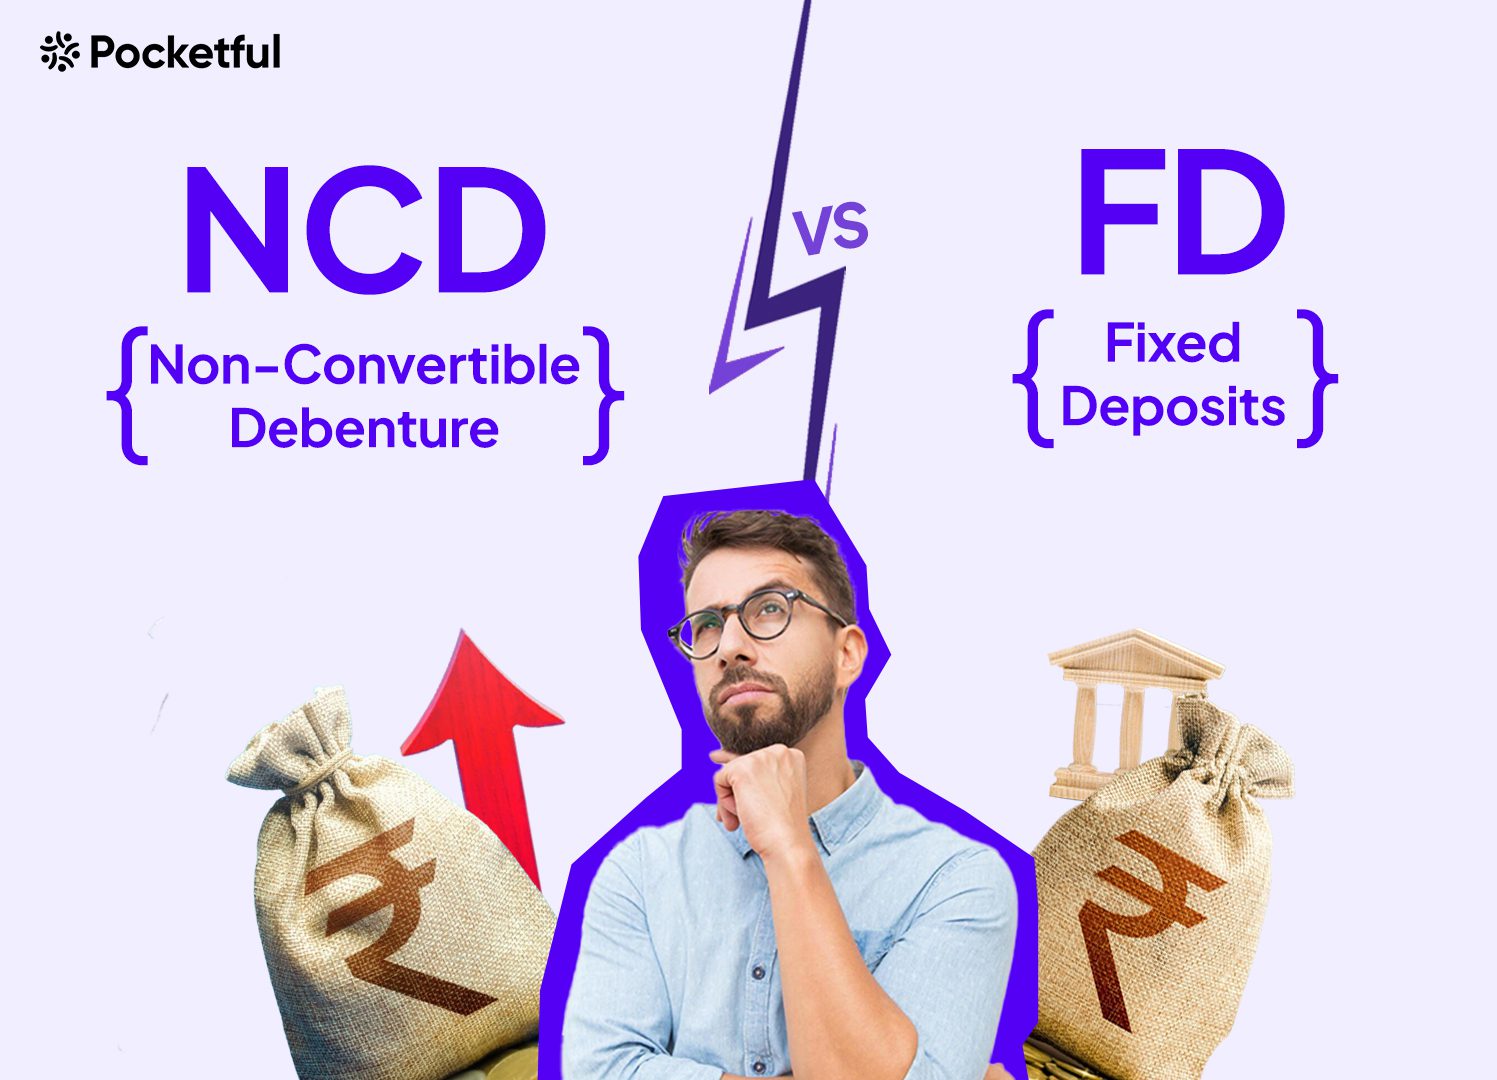 Non-Convertible Debenture (NCD) vs Fixed Deposit (FD): Meaning, Features, and Differences Explained